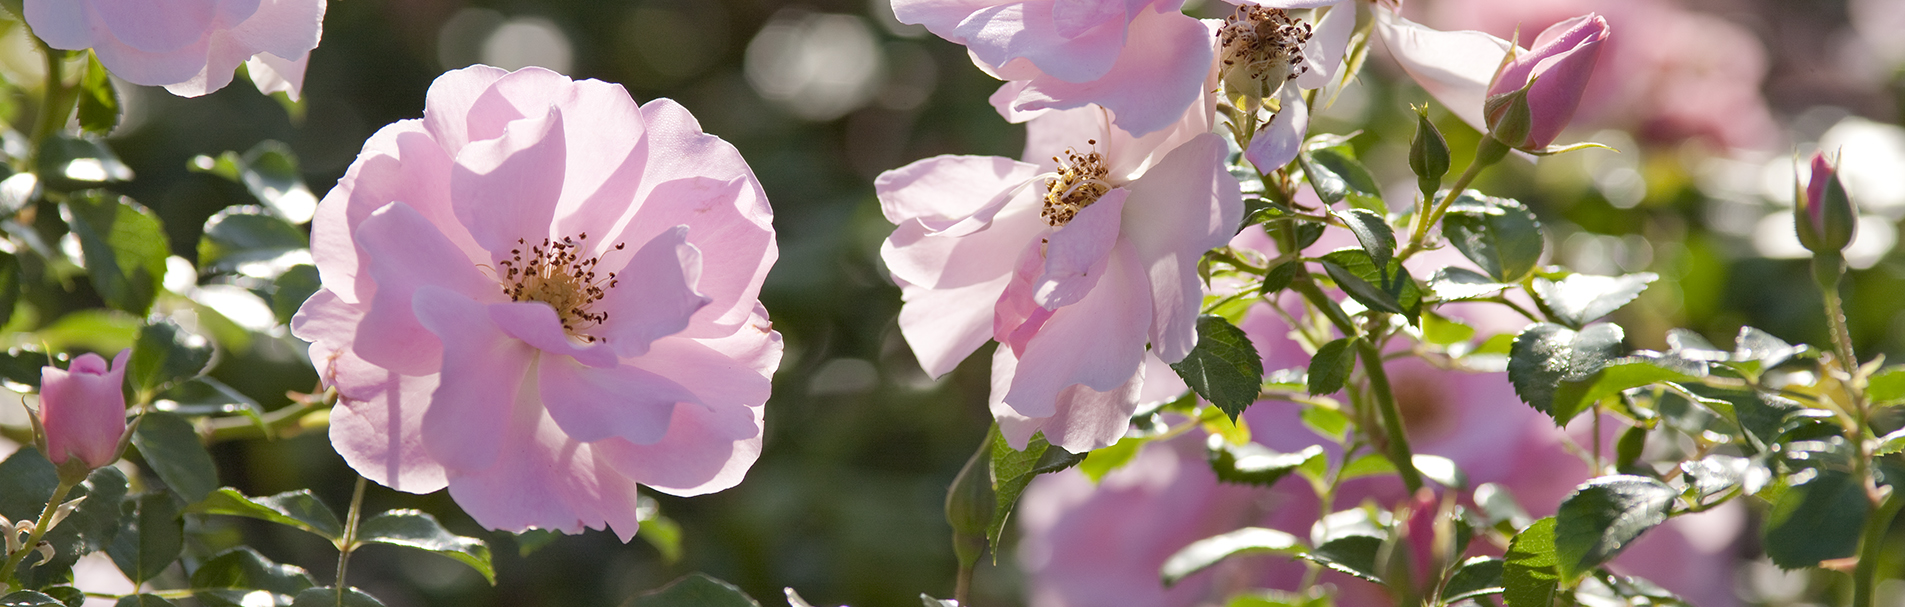 Pastel pink flowers of The Queen Mother Rose.